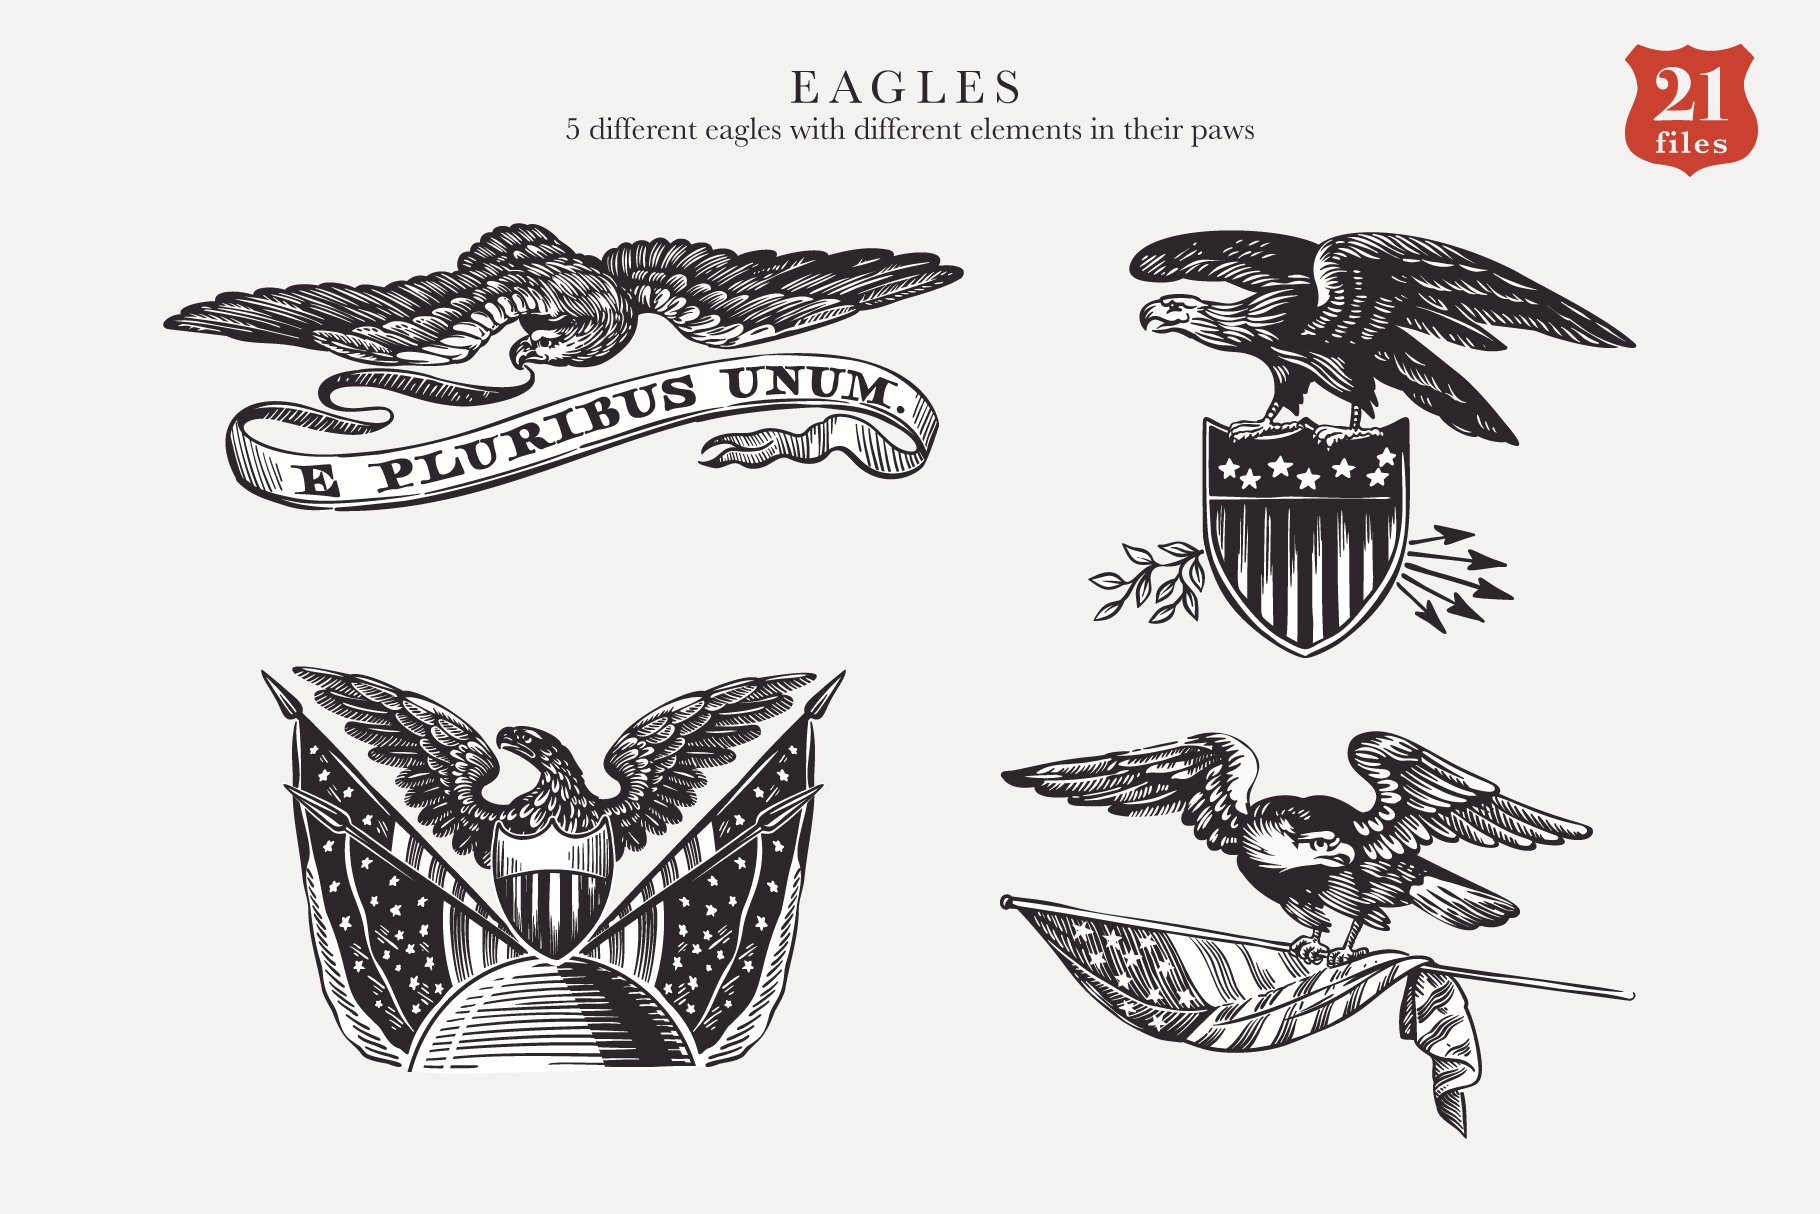 BW eagles in a hand drawn style.